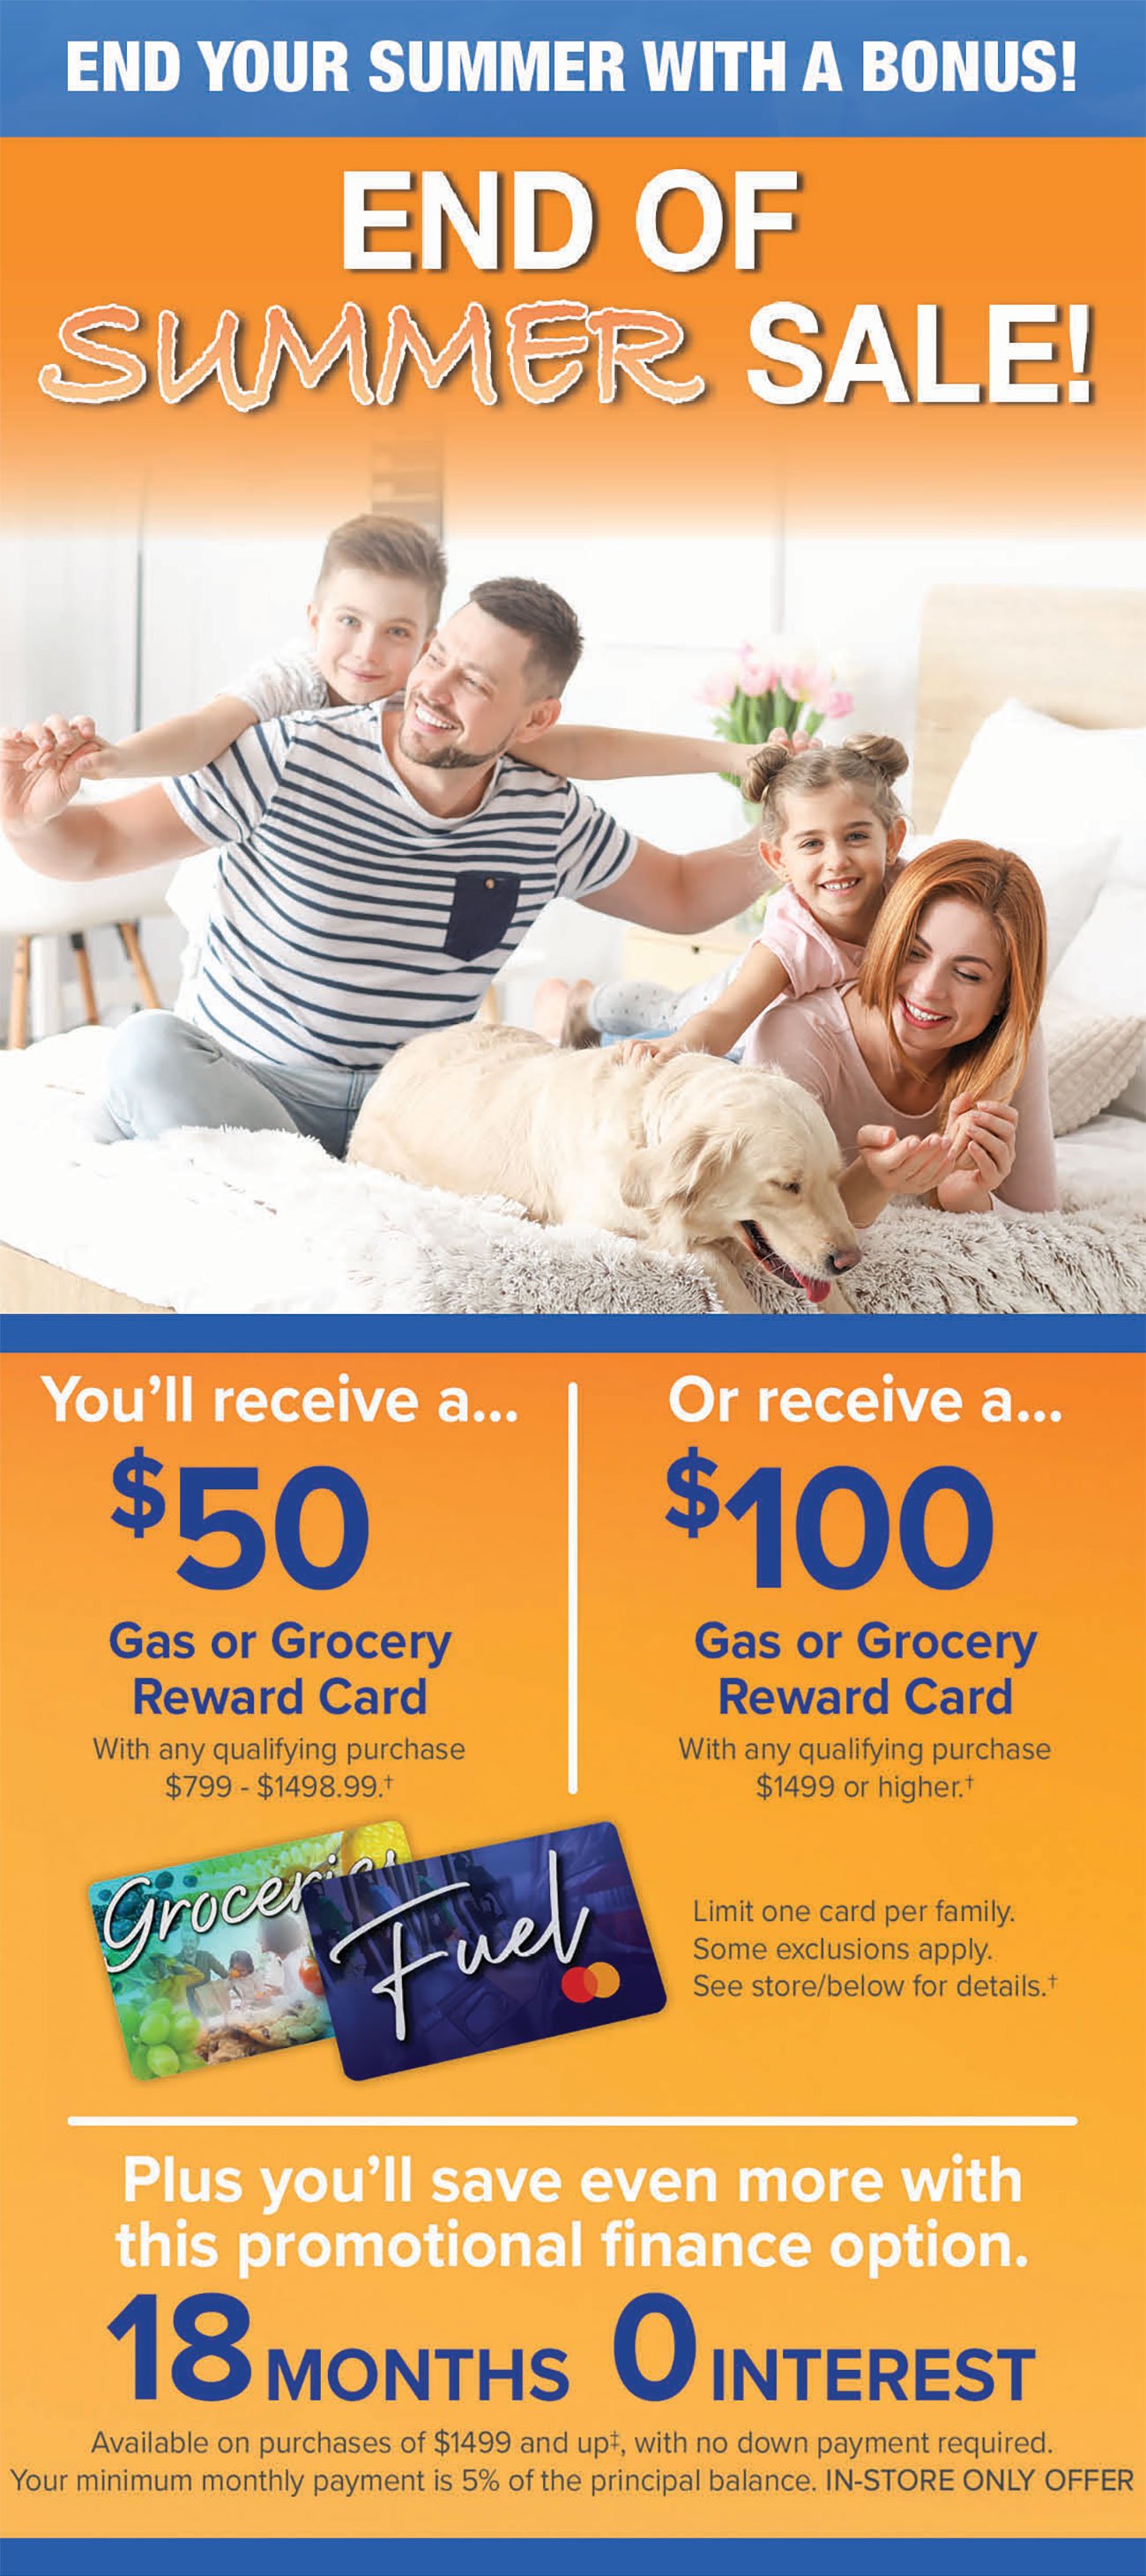 END YOUR SUMMER WITH A BONUS! 50 %100 Gas or Grocery Gas or Grocery Reward Card Reward Card With any qualifying purchase With any qualifying purchase $799 - $1498.99.1 $1499 or higher.t Limit one card per family. Some exclusions apply. See storebelow for details. 1 8 MONTHS 0 INTEREST Available on purchases of $1499 and up?, with no down payment required. Your minimum monthly payment is 5% of the principal balance. IN-STORE ONLY OFFER 